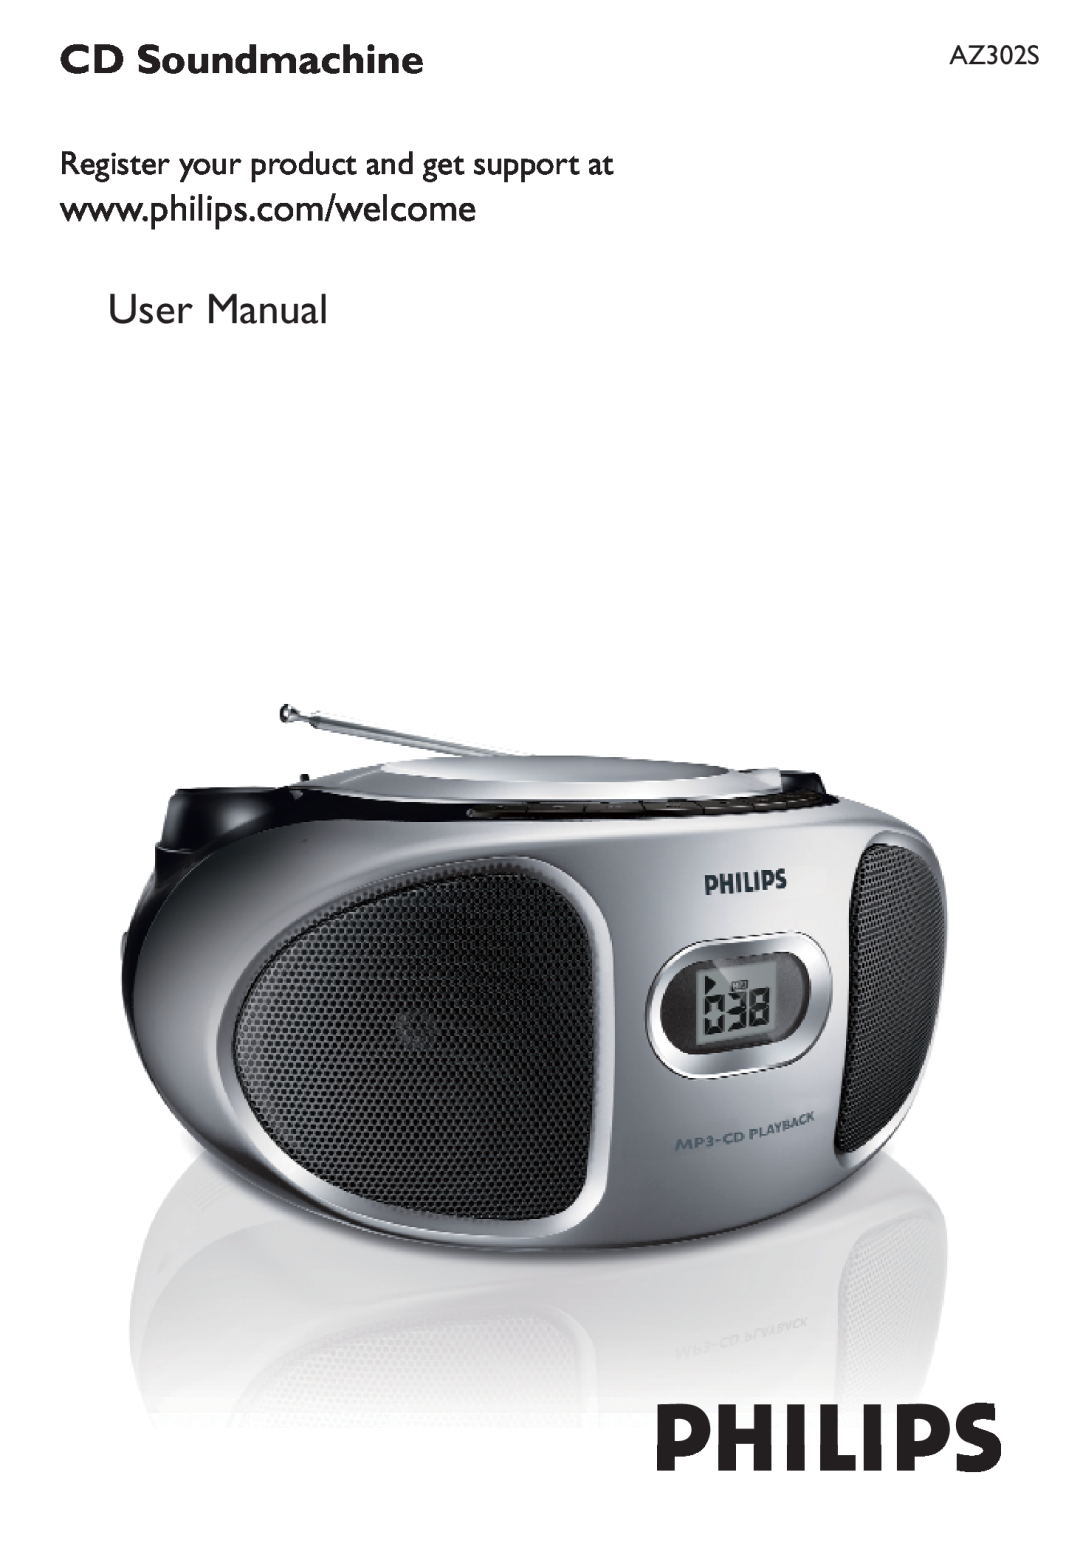 Philips AZ302S user manual CD Soundmachine, Register your product and get support at 